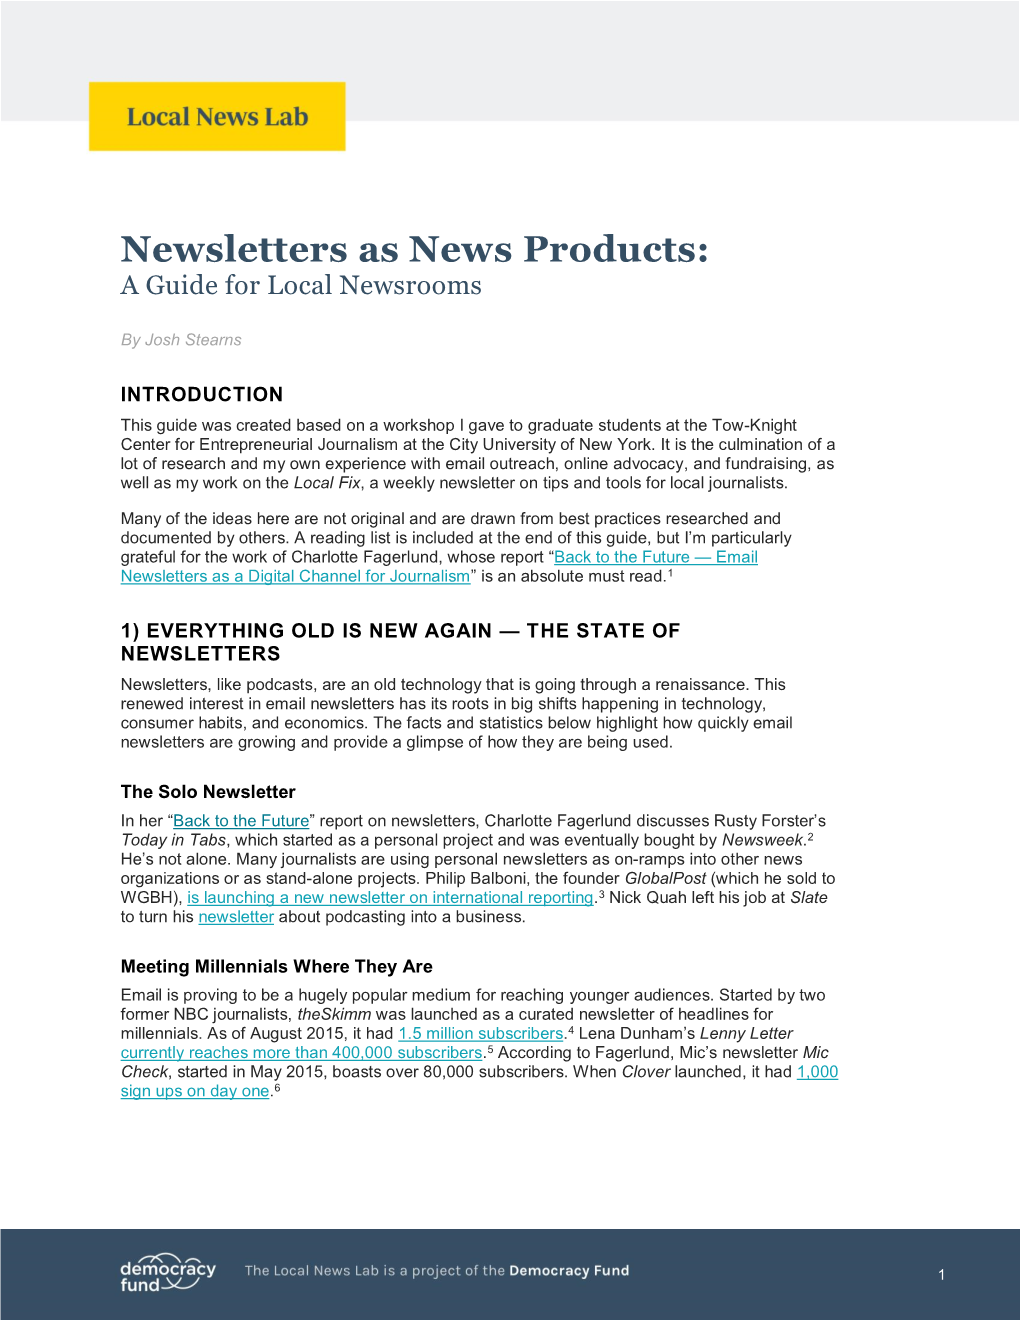 Newsletters As News Products: a Guide for Local Newsrooms